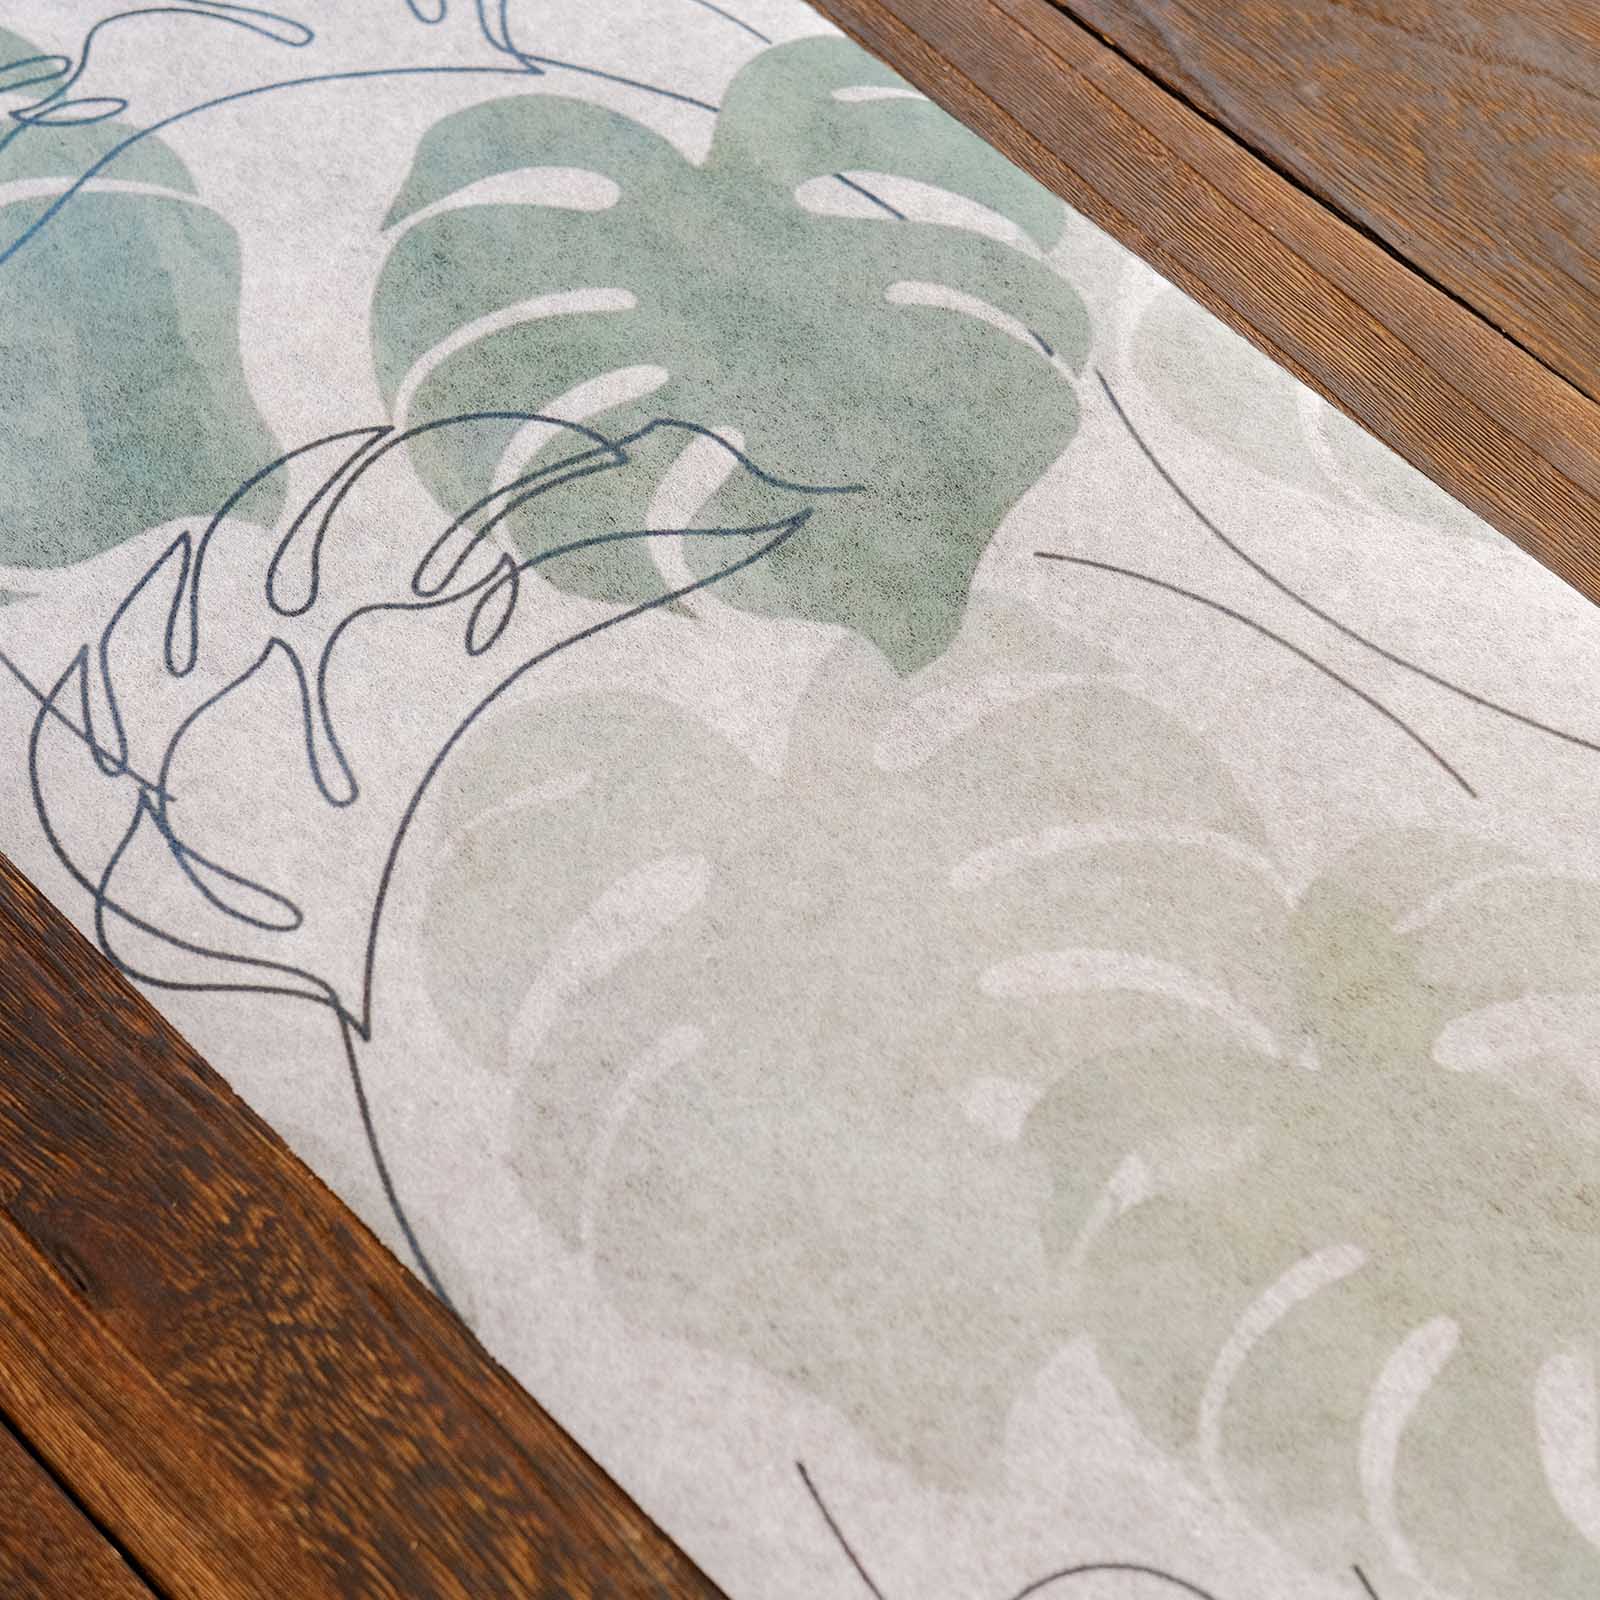 11x108 in White and Green Non Woven Table Runner with Monstera Palm Leaves Print